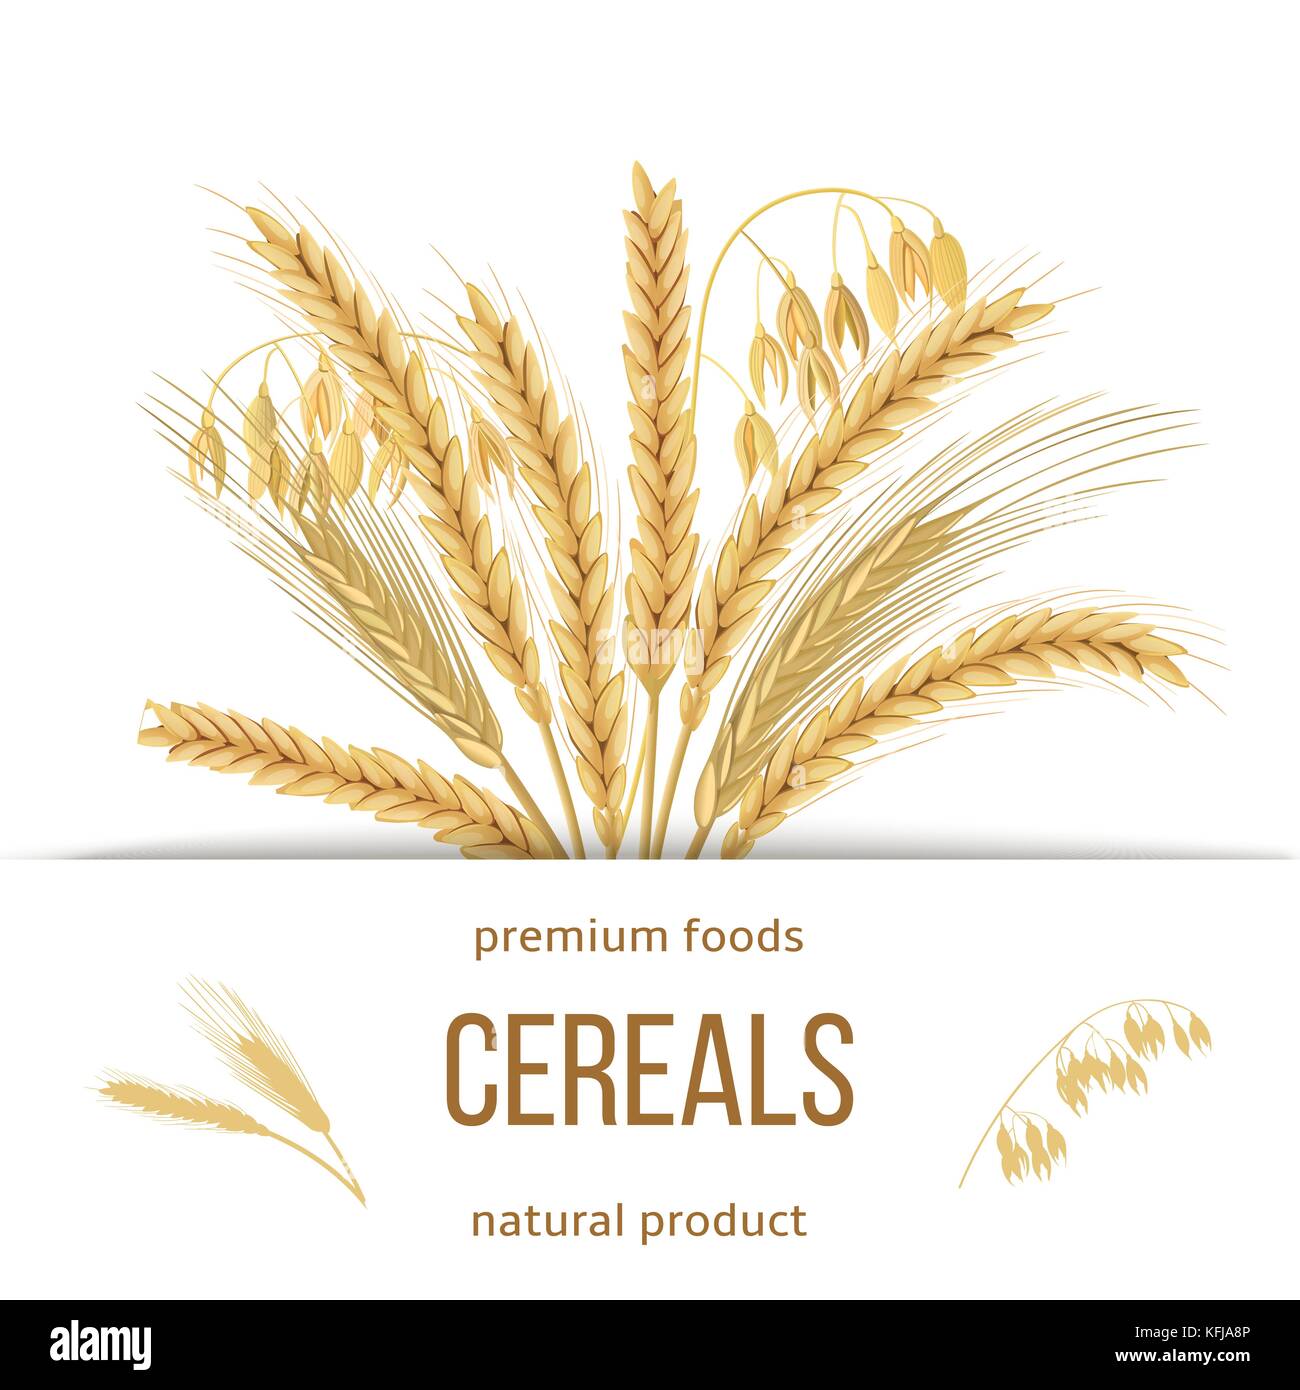 Wheat, barley, oat and rye set. Four cereals grains with ears, sheaf and text premium foods, natural product Stock Vector